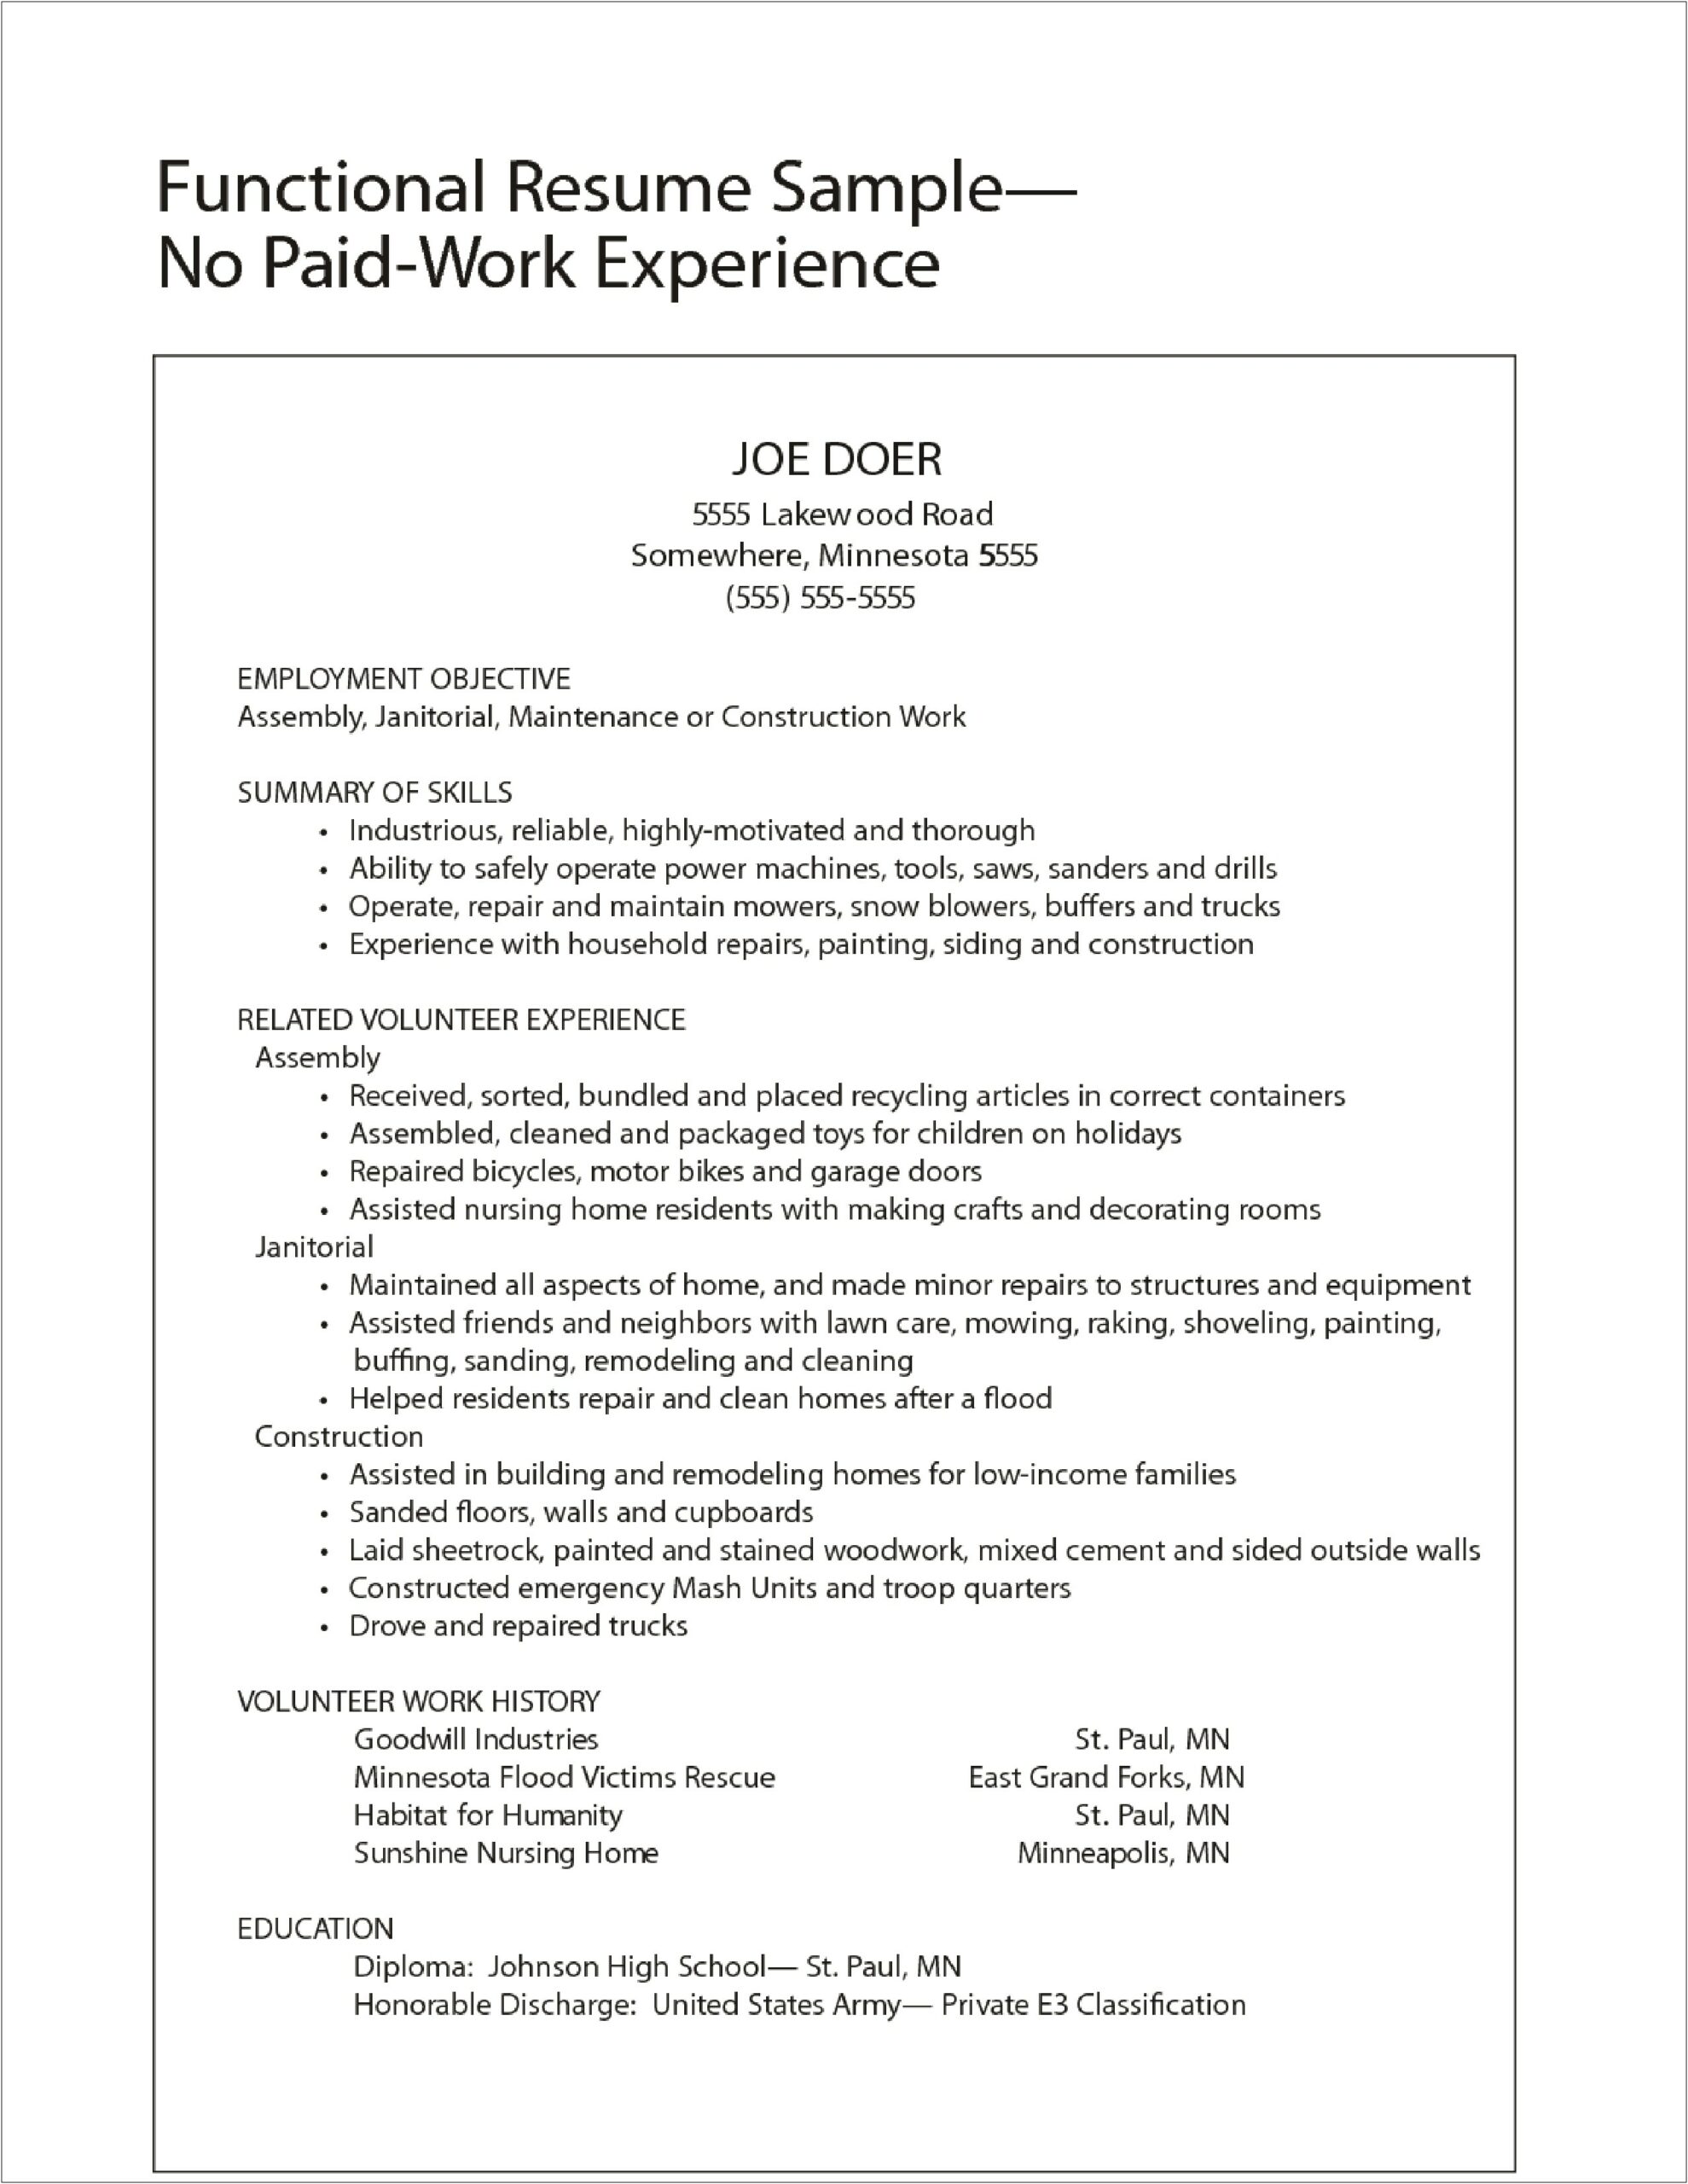 Resume Samples Without Work Experience